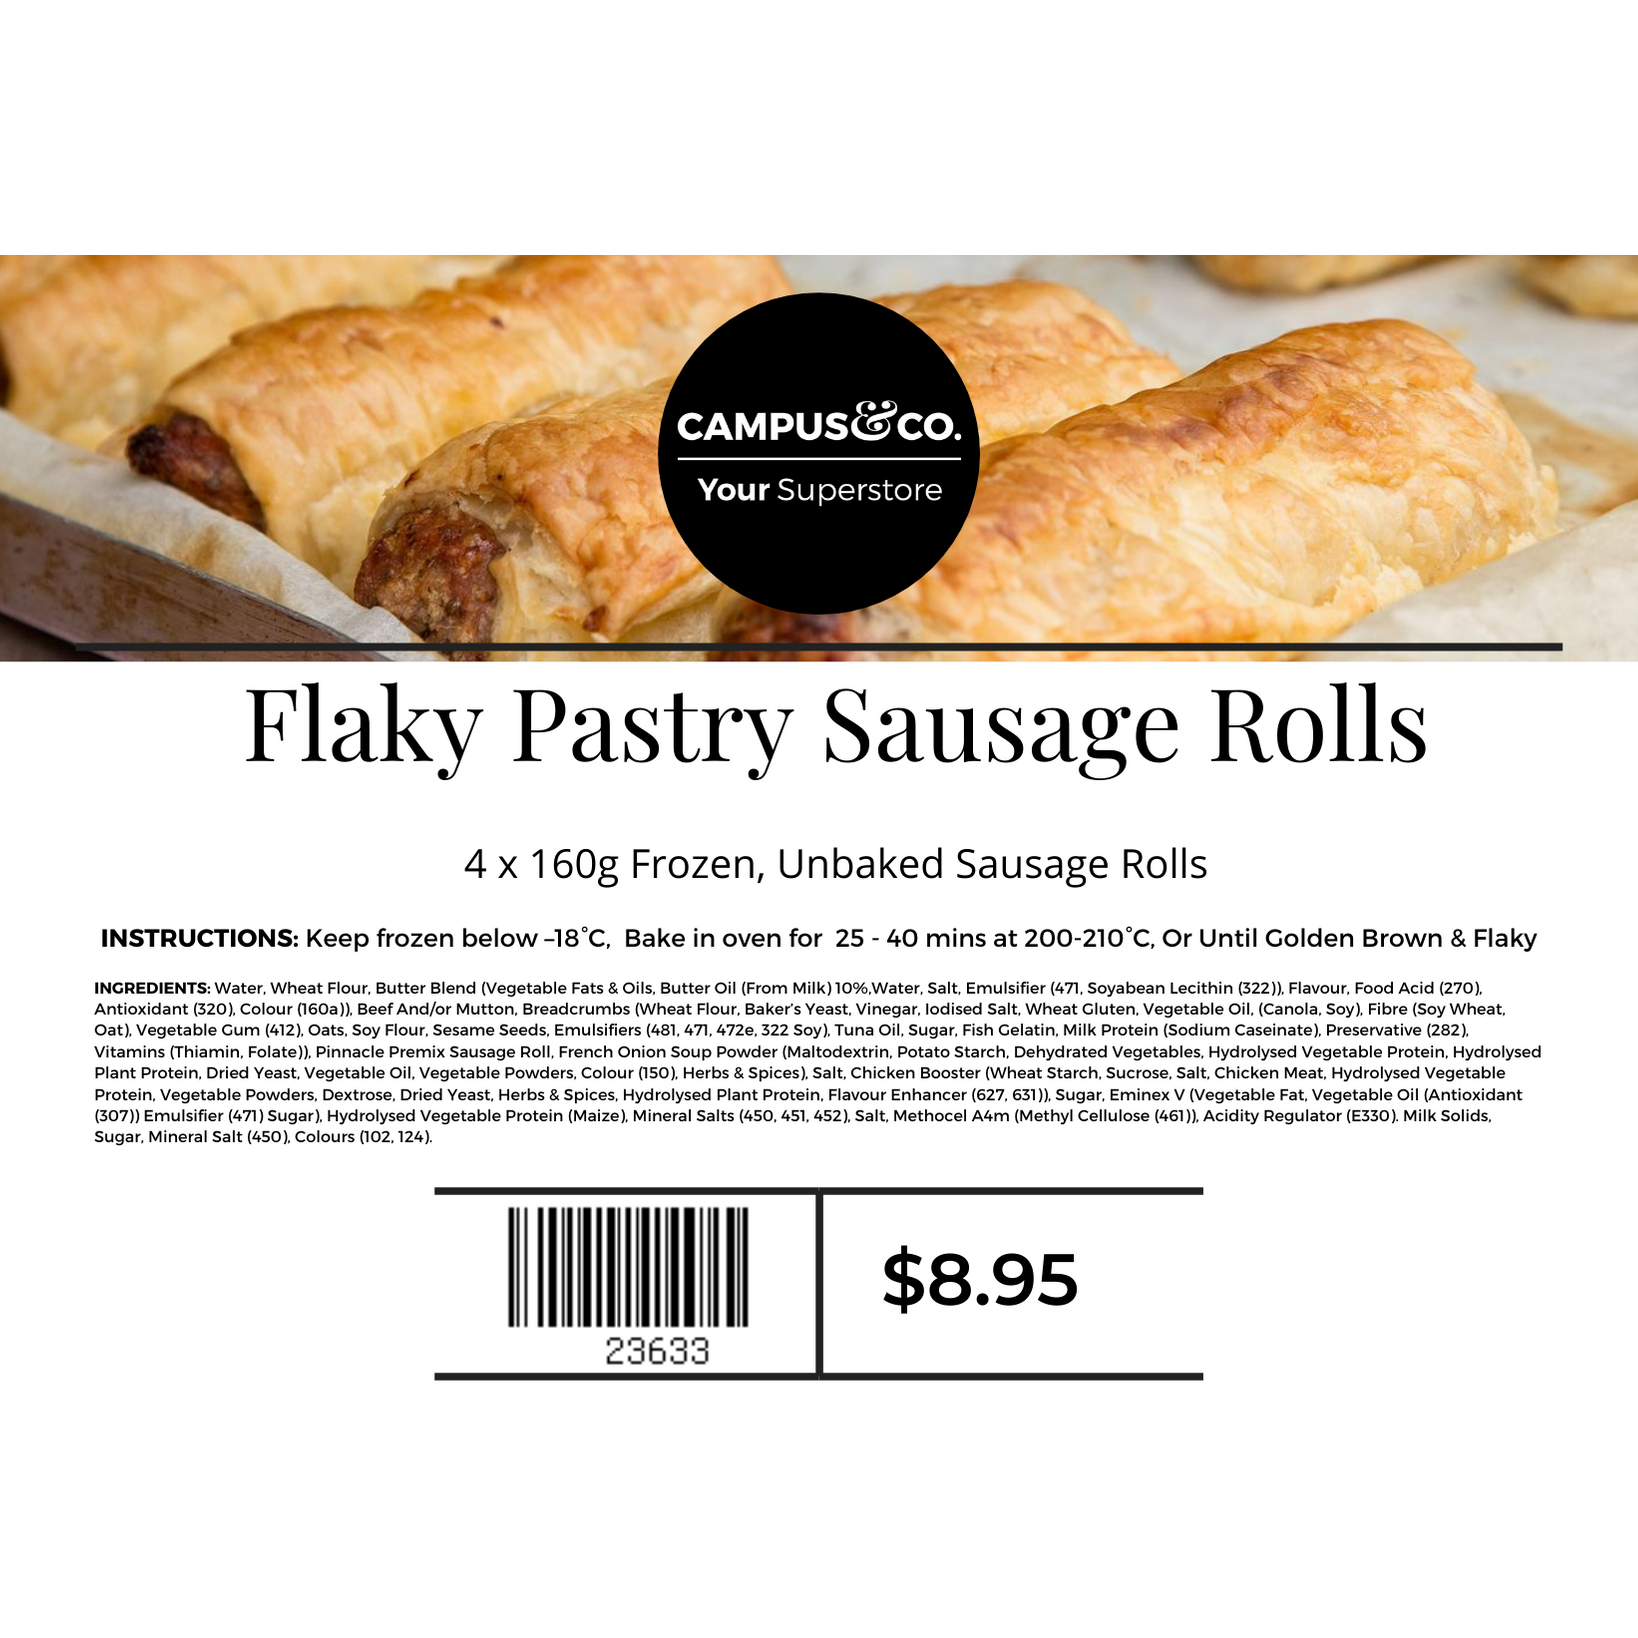 Flaky Pastry Sausage Rolls Unbaked 4 x 160g